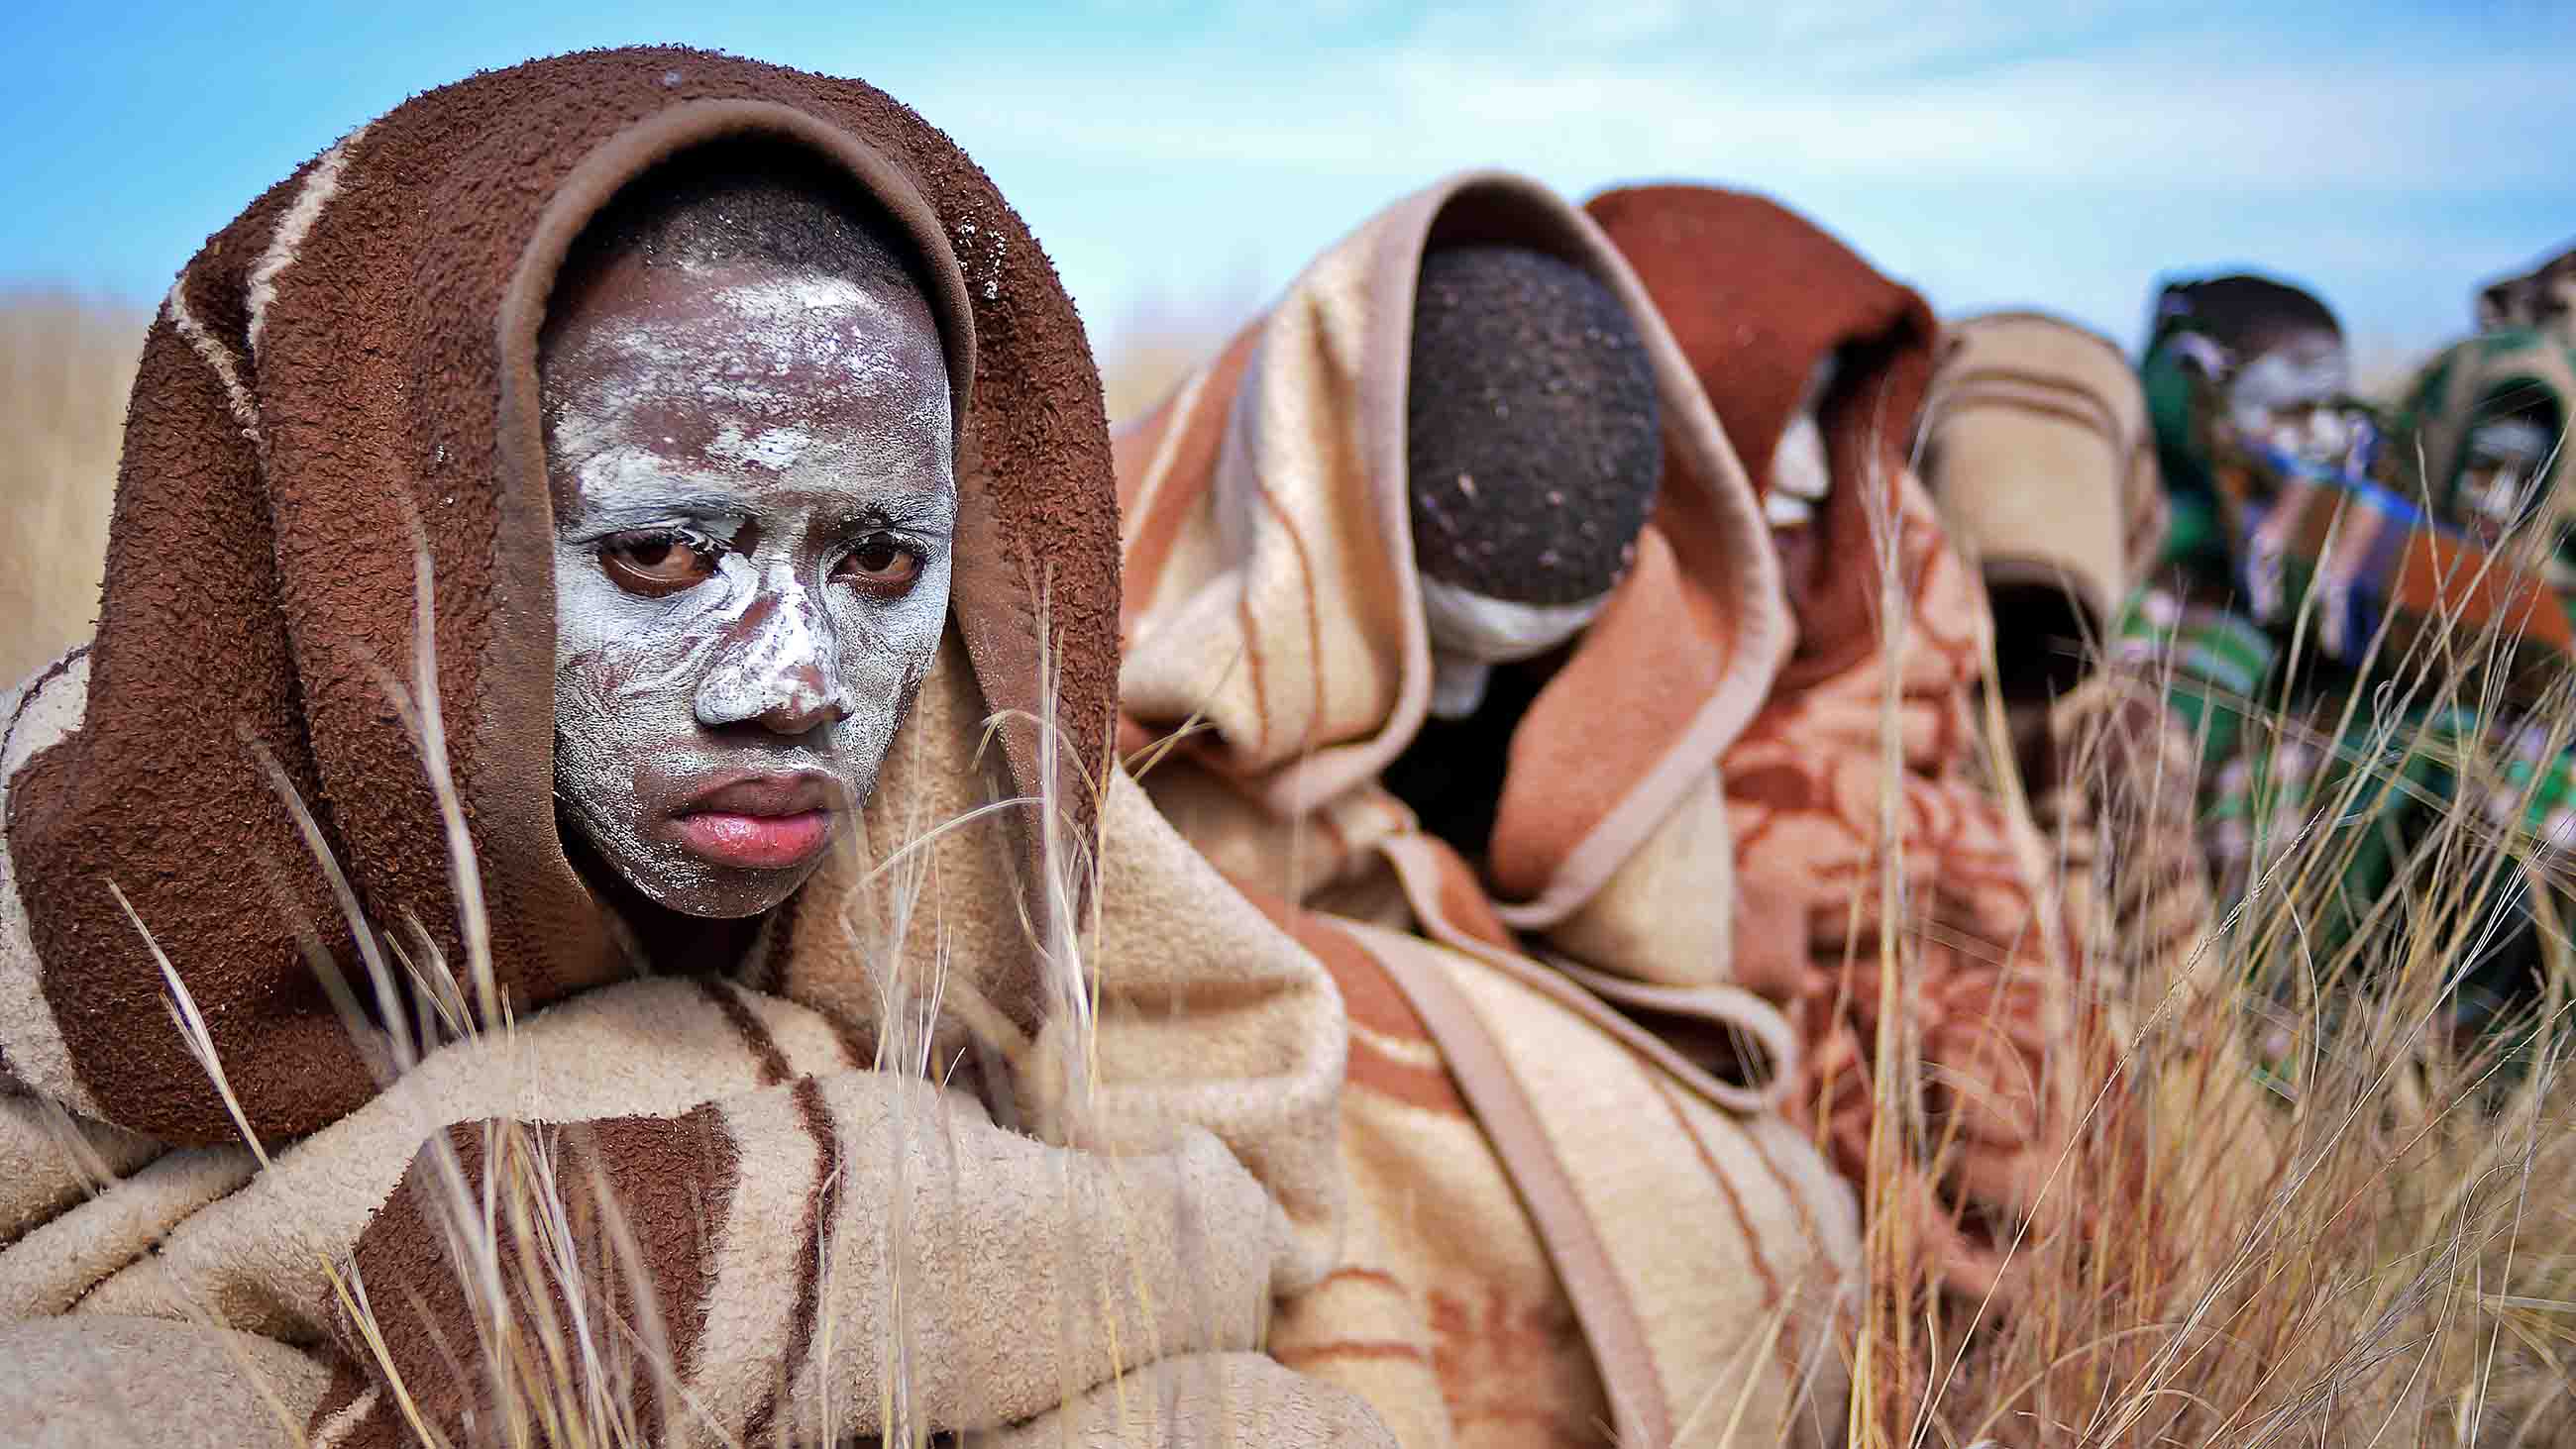 Boys from the Xhosa tribe who have undergone a circumcision ceremony sit near Qunu on June 30, 2013.